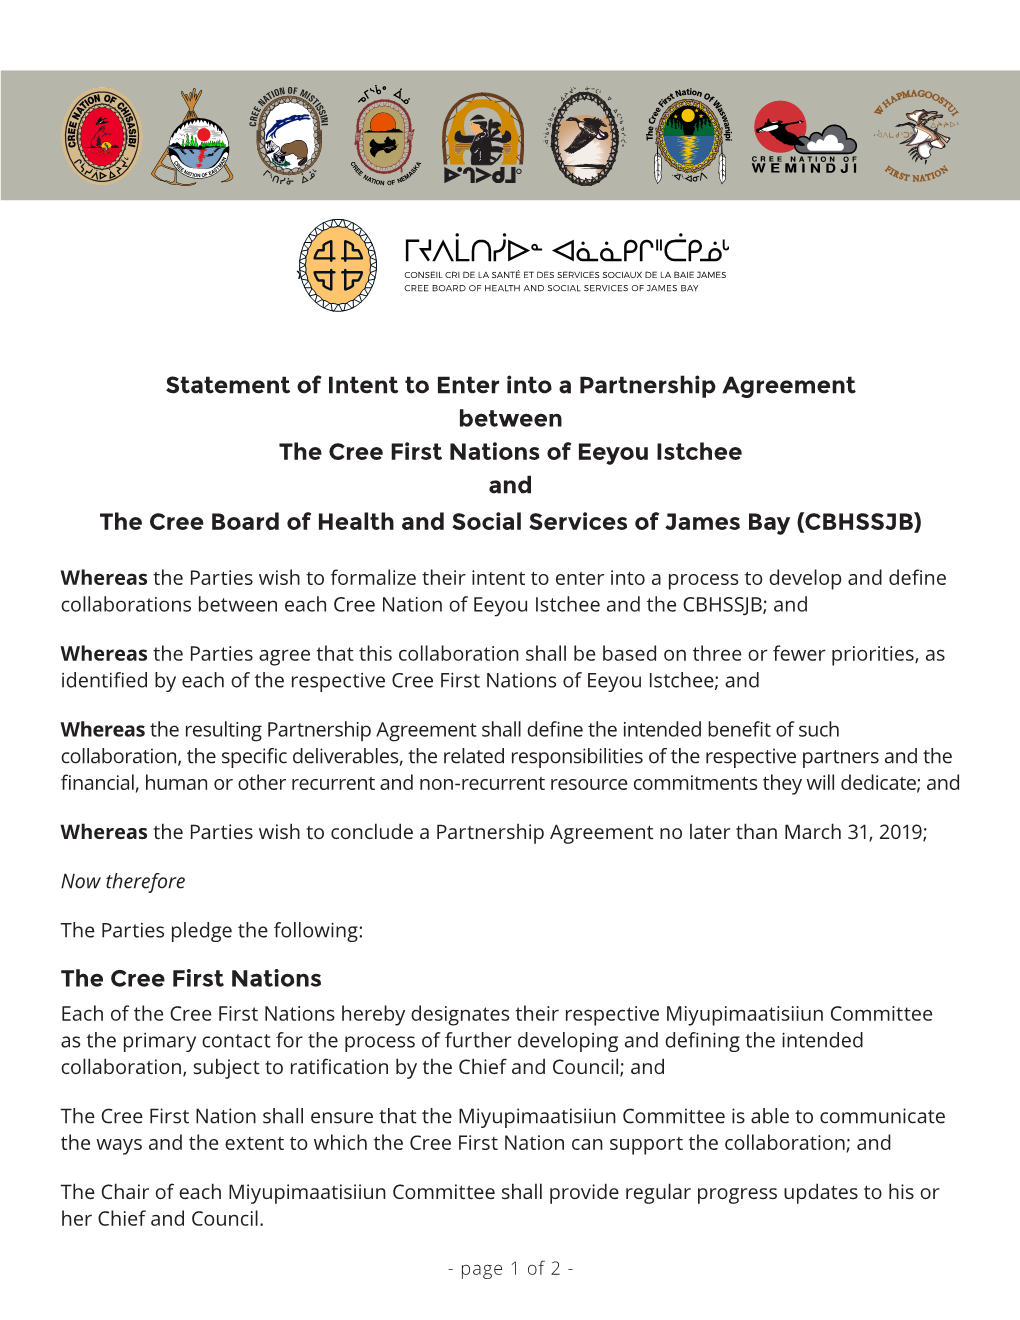 Statement of Intent to Enter Into a Partnership Agreement Between